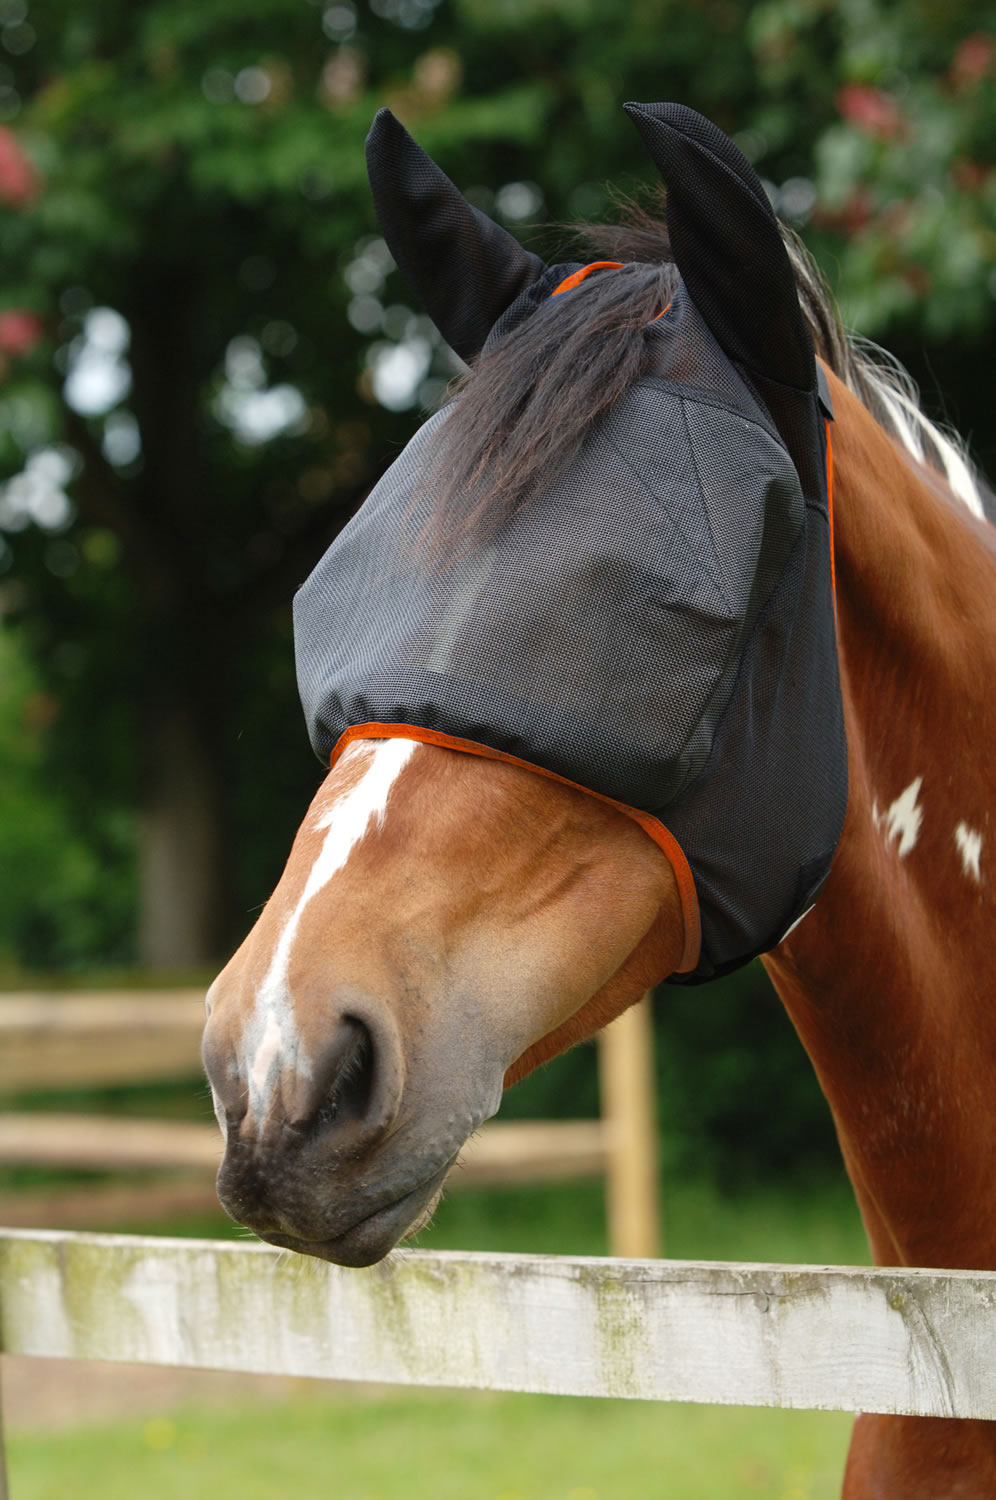 EQUILIBRIUM FIELD RELIEF MIDI FLY MASK & EARS BLACK/ORANGE MEDIUM BLACK/ORANGE MEDIUM